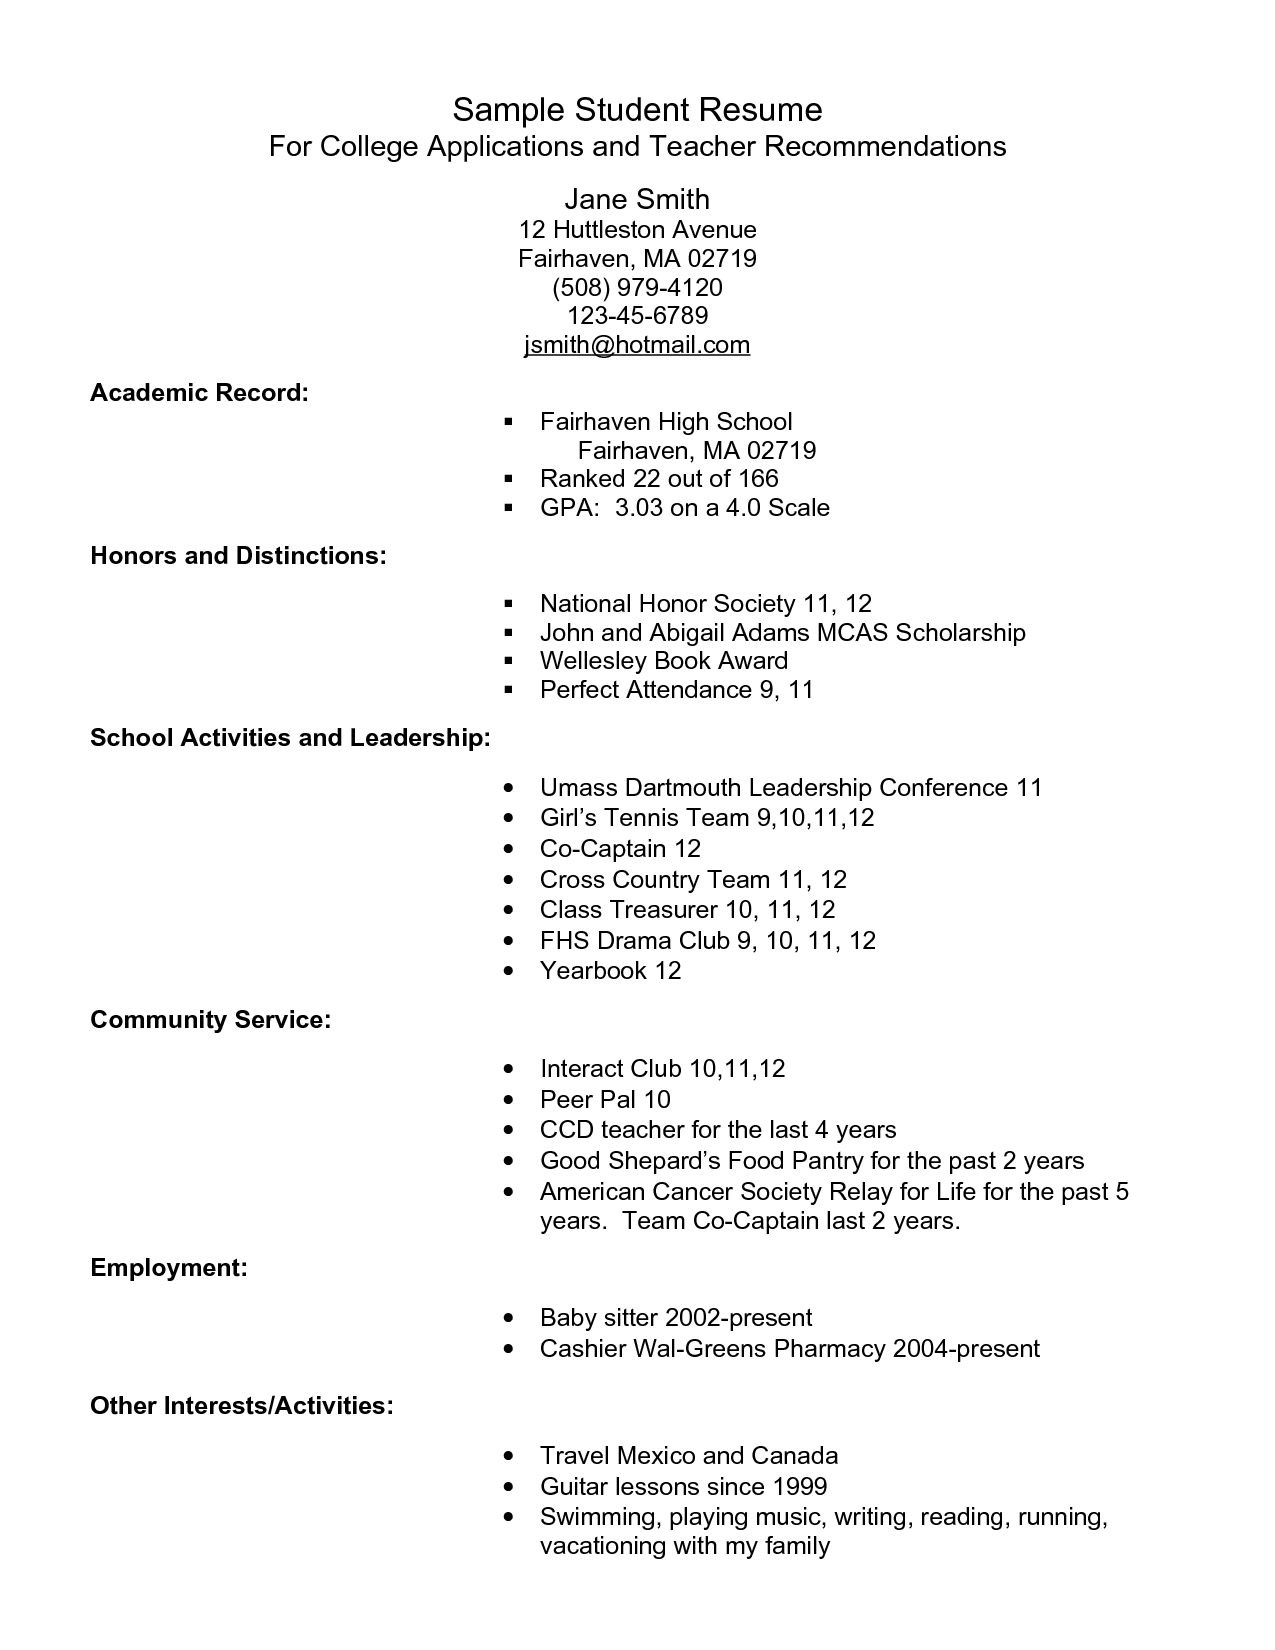 example resume for high school students for college applications 